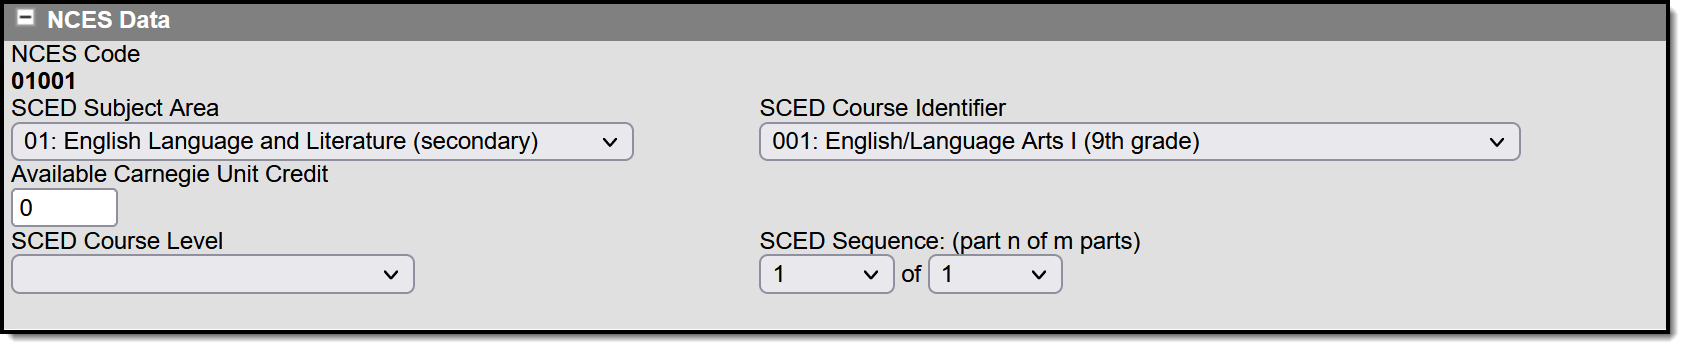 Screenshot of the NCES Data section of the Course Information tool. 